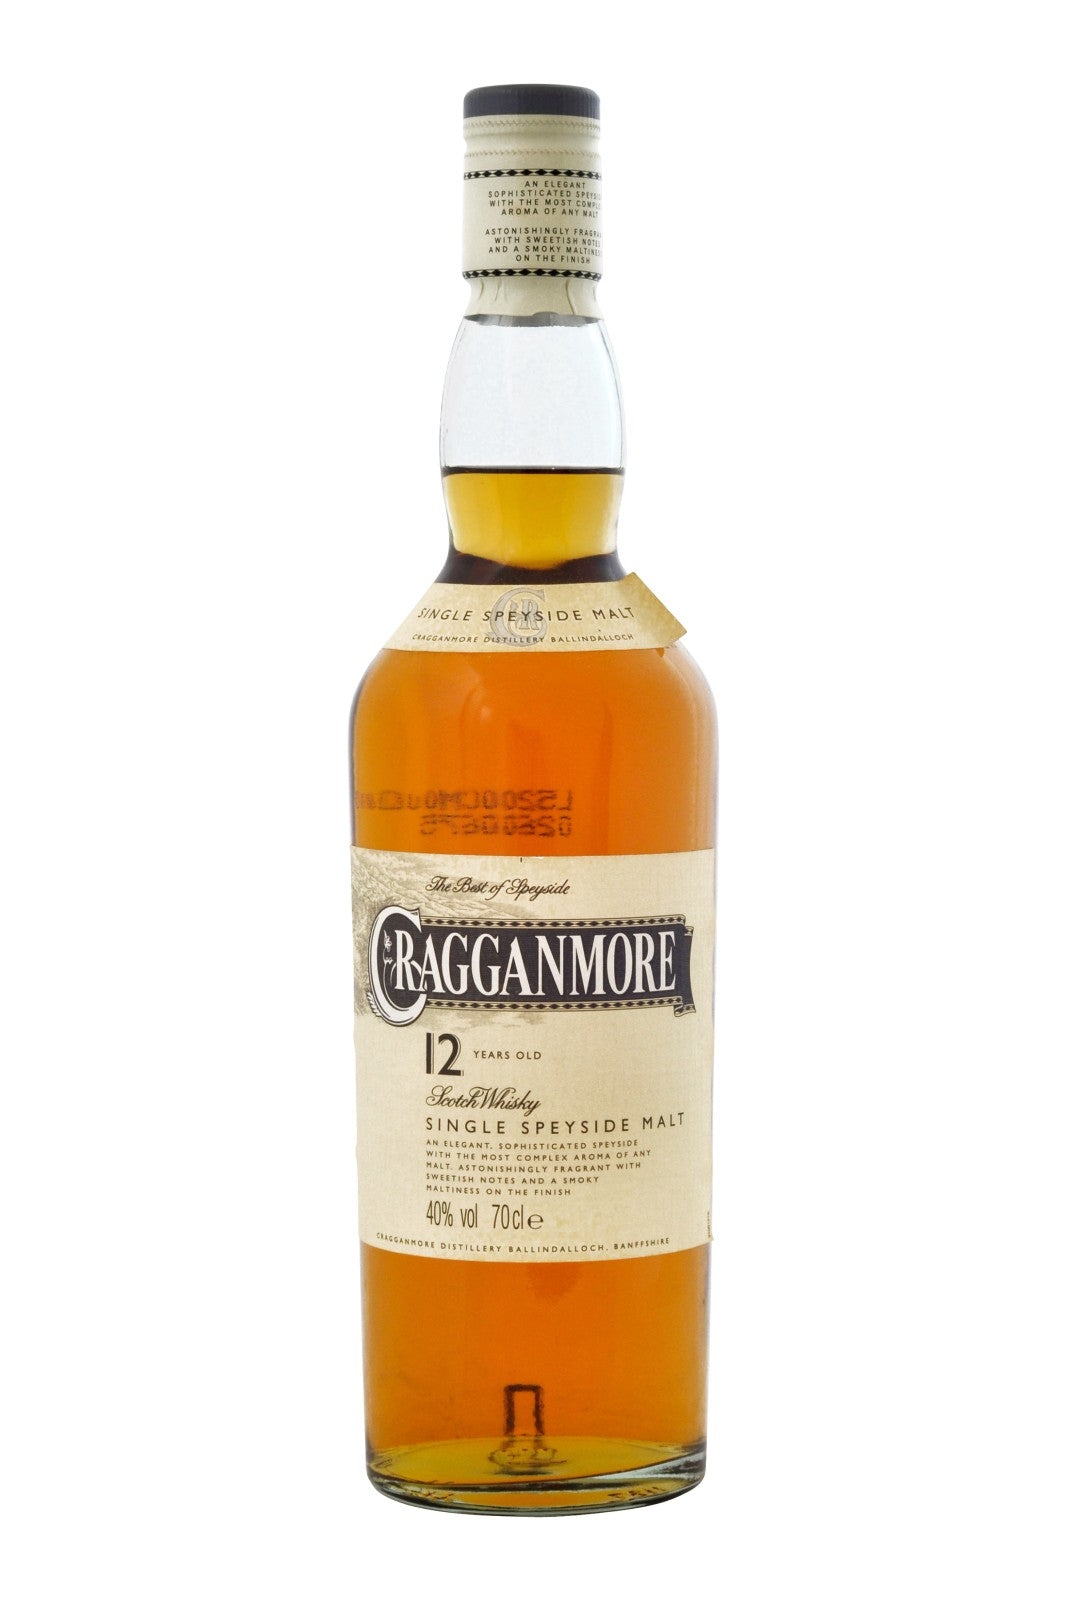 Cragganmore 12 Year Old  - old version